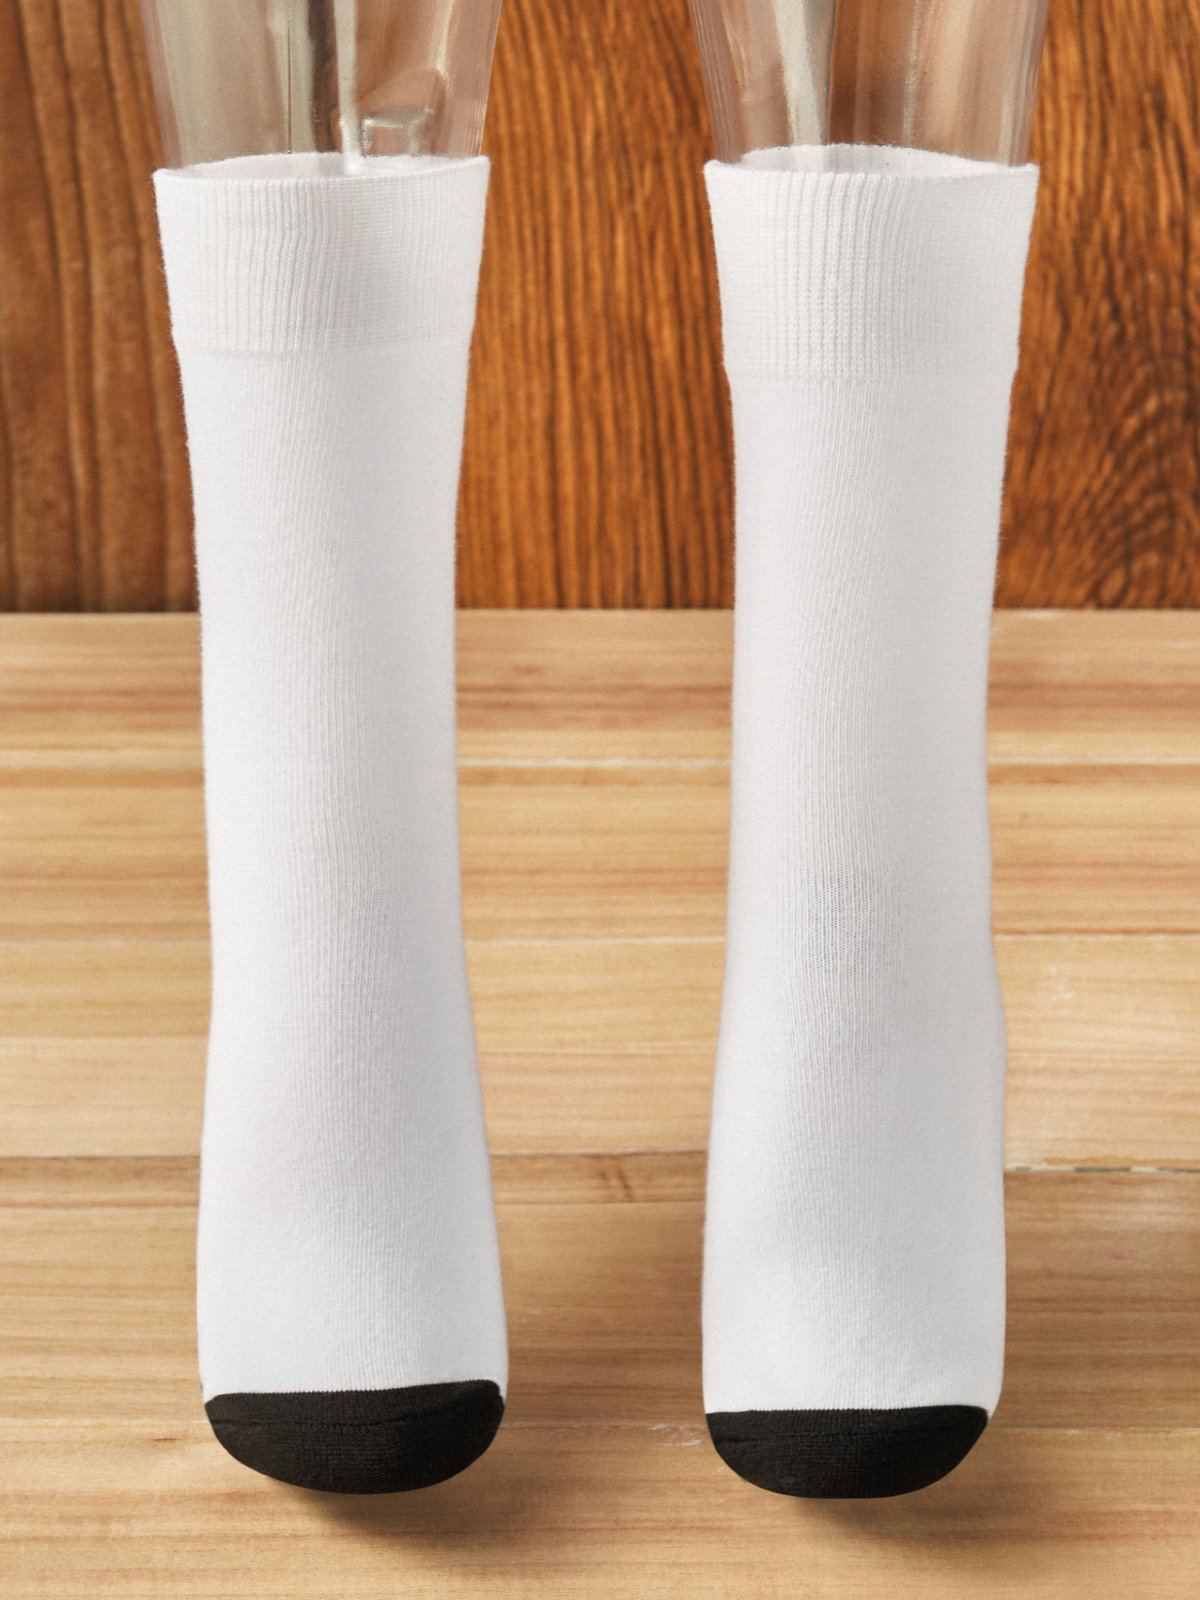 If You Can Read This Casual Letter Print Cotton Socks